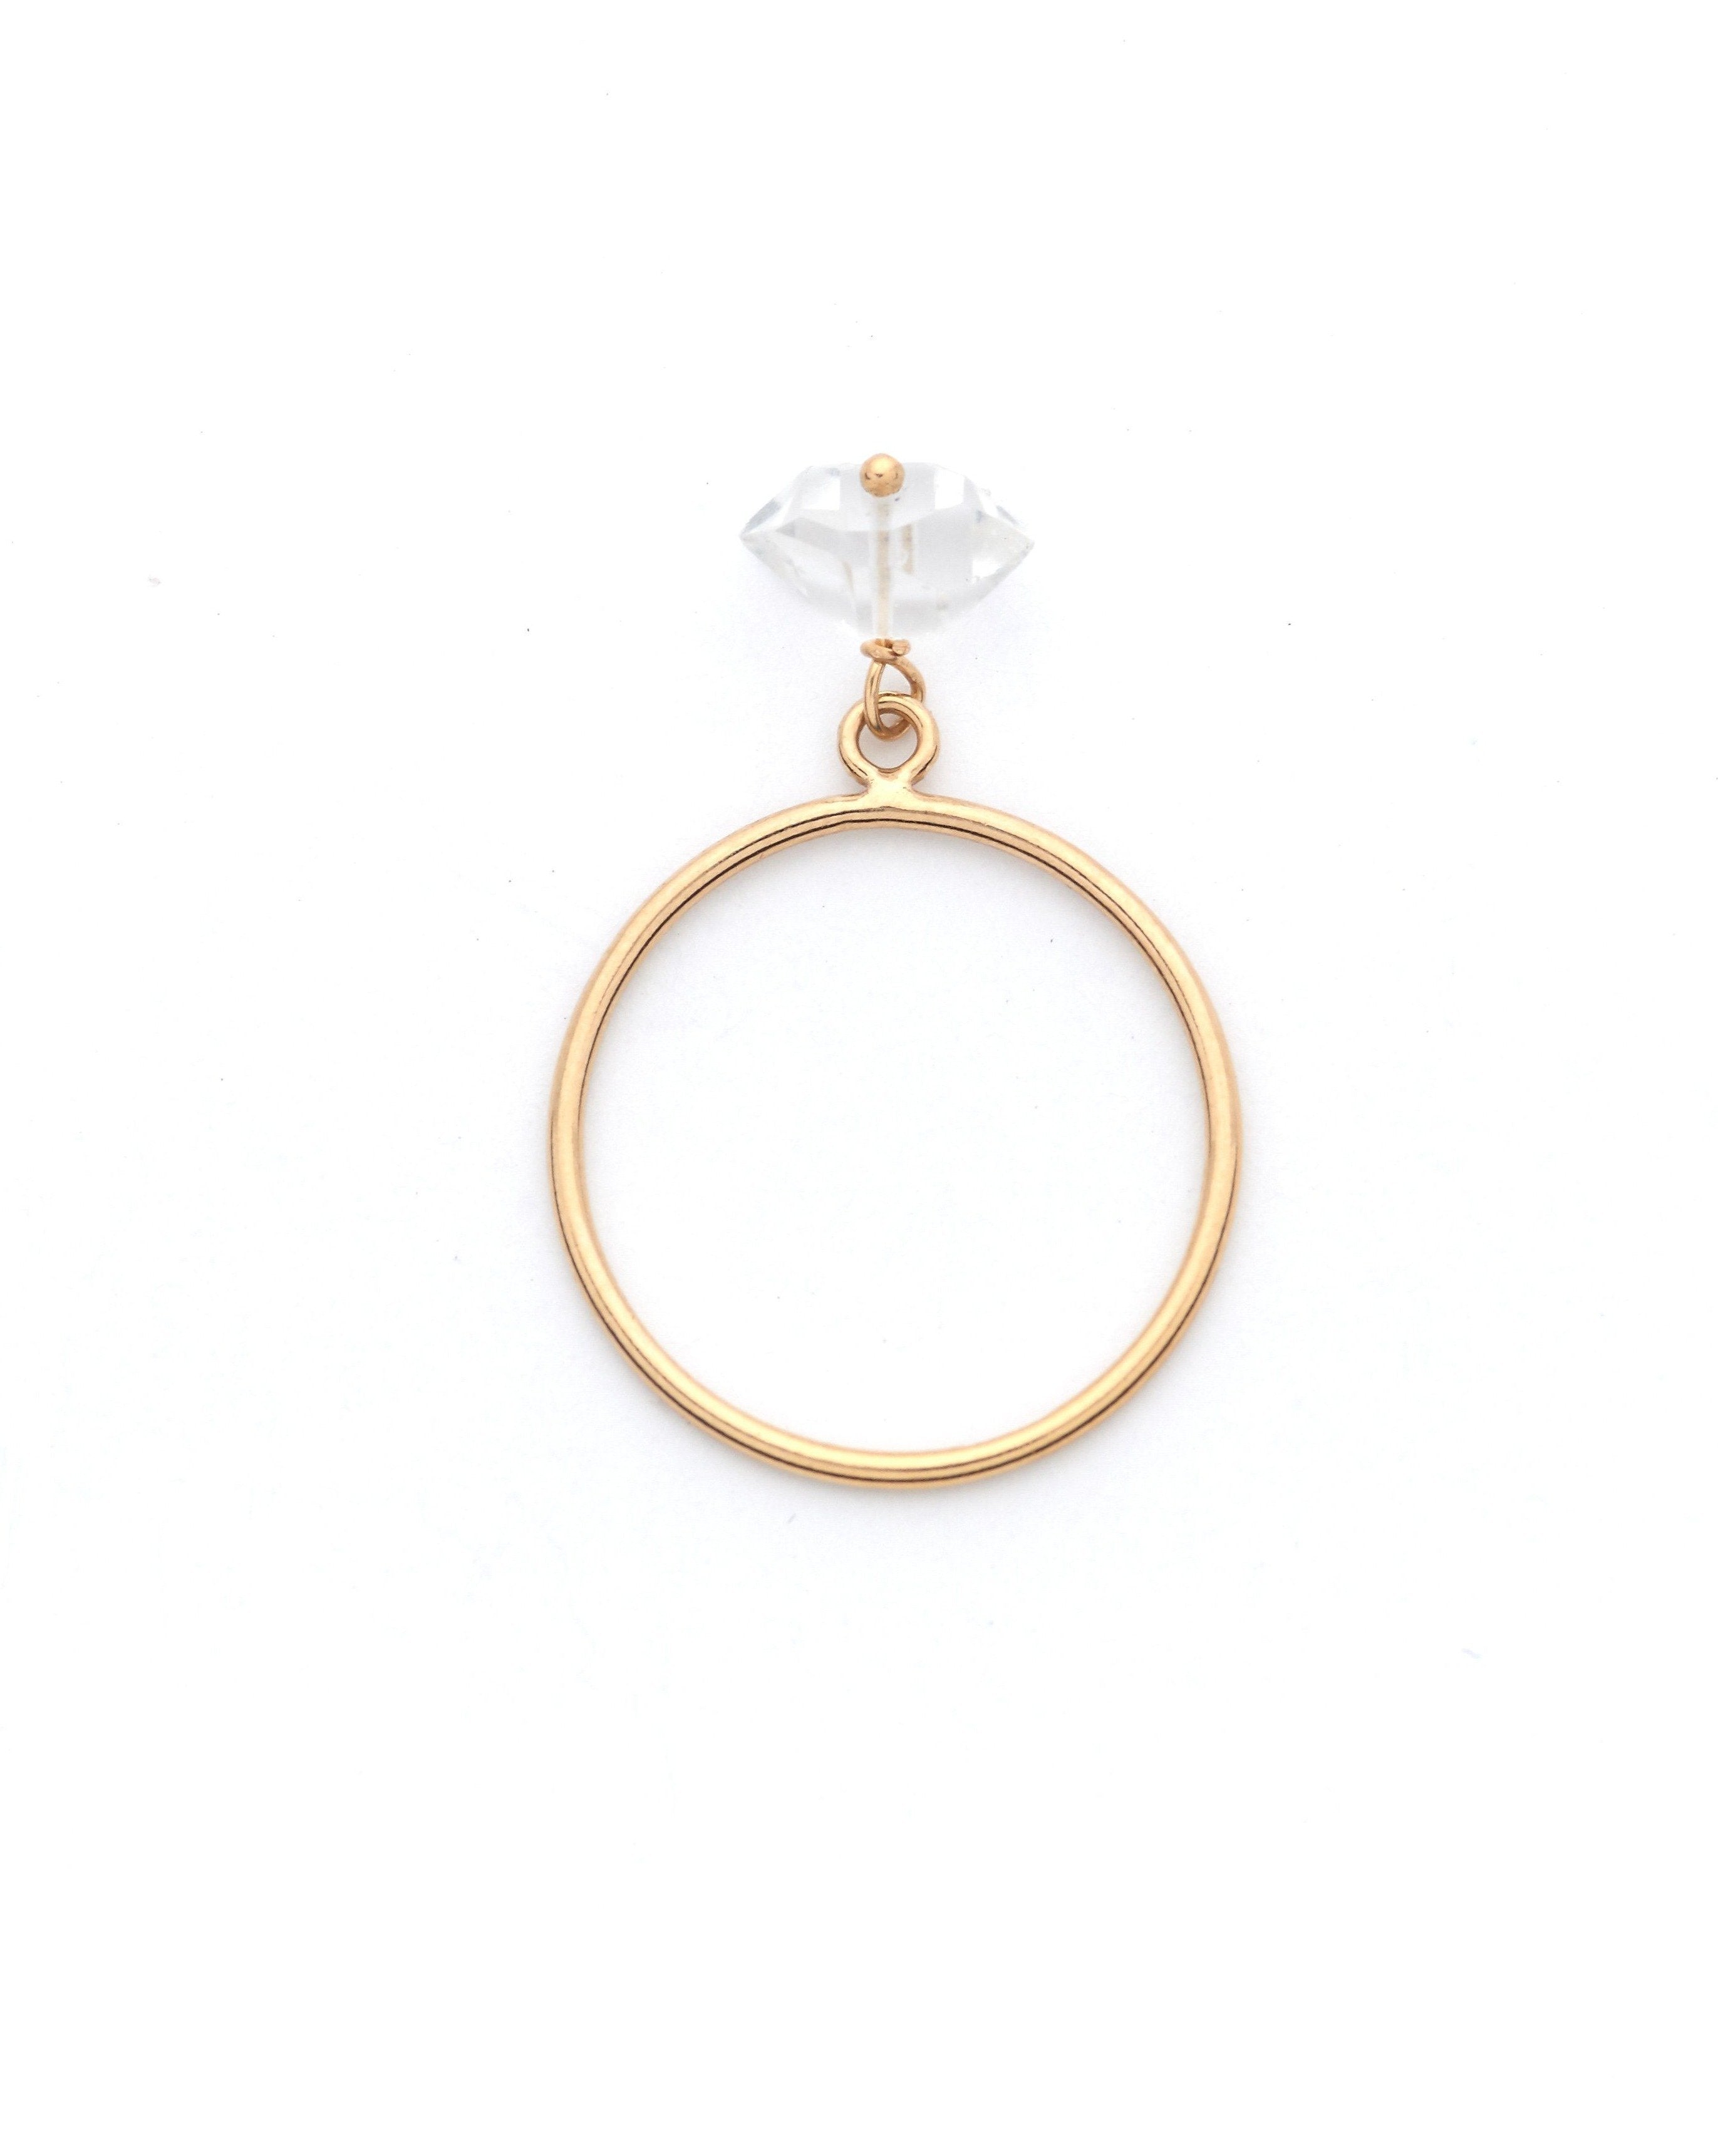 Petal Ring by KOZAKH. A 1mm band crafted in 14K Gold Filled, featuring a Herkimer Diamond charm.